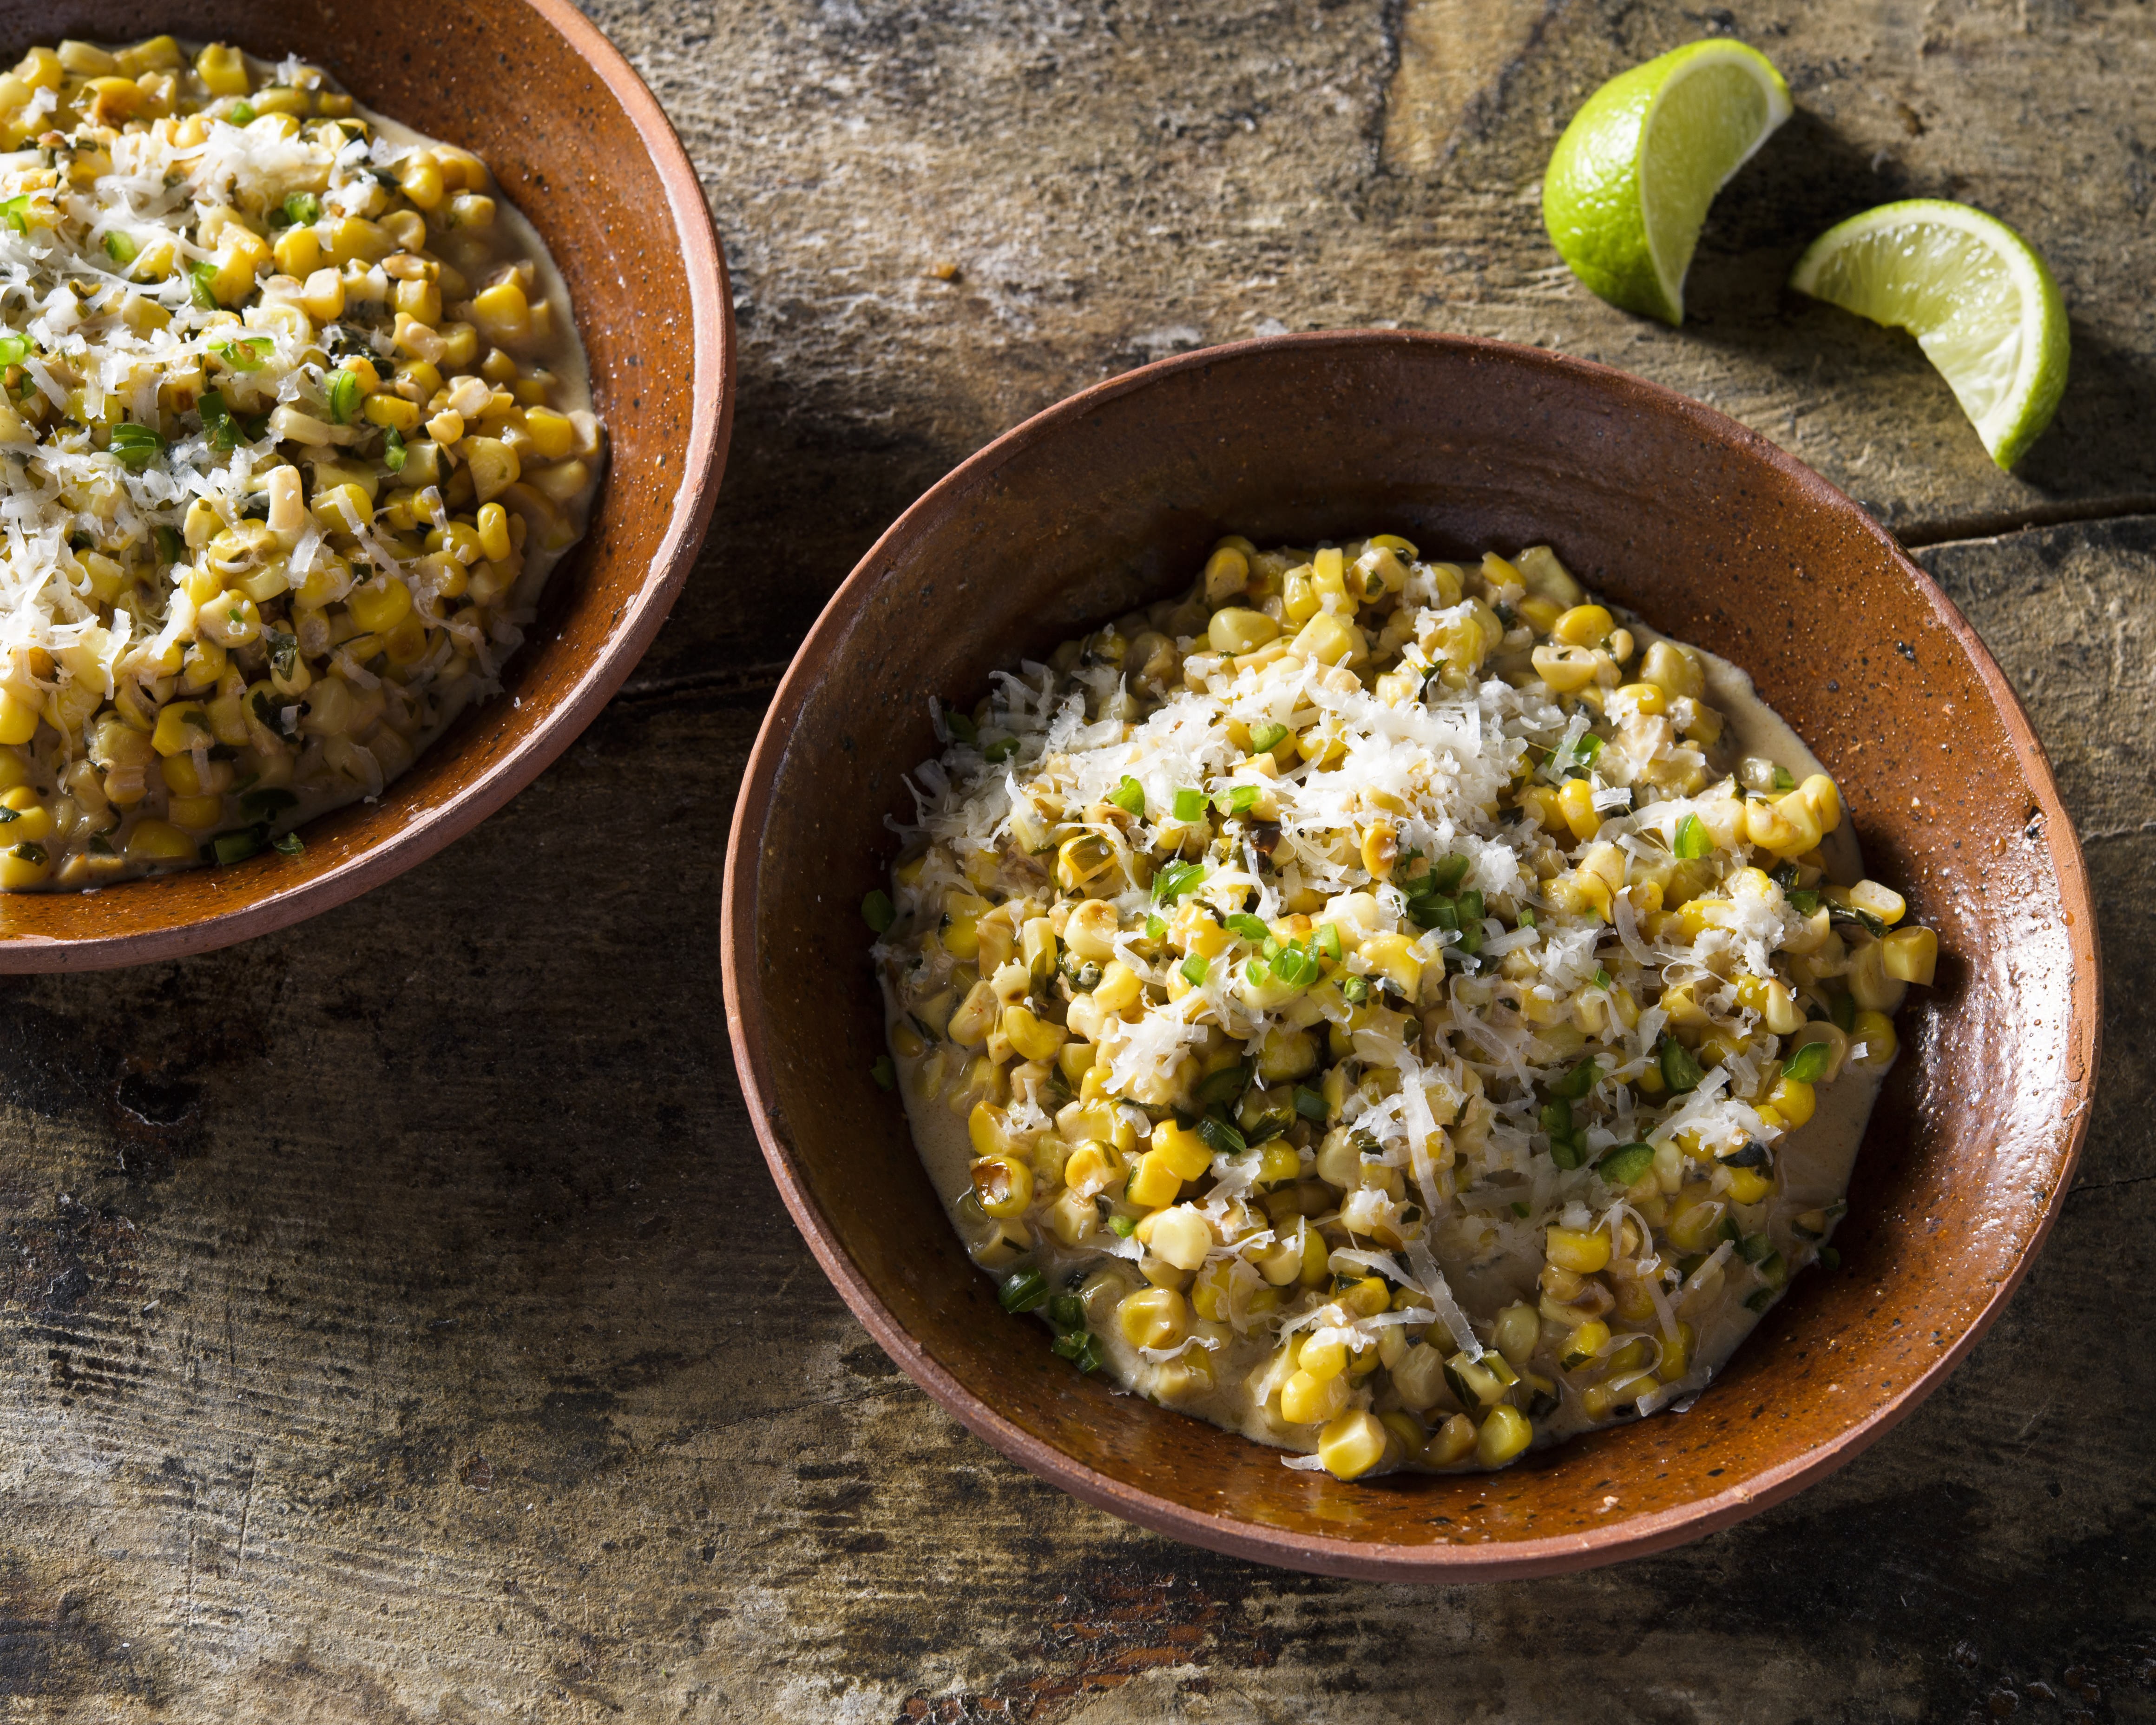 https://www.177milkstreet.com/assets/site/mexican-style-corn-chili-lime-esquites-h.jpg